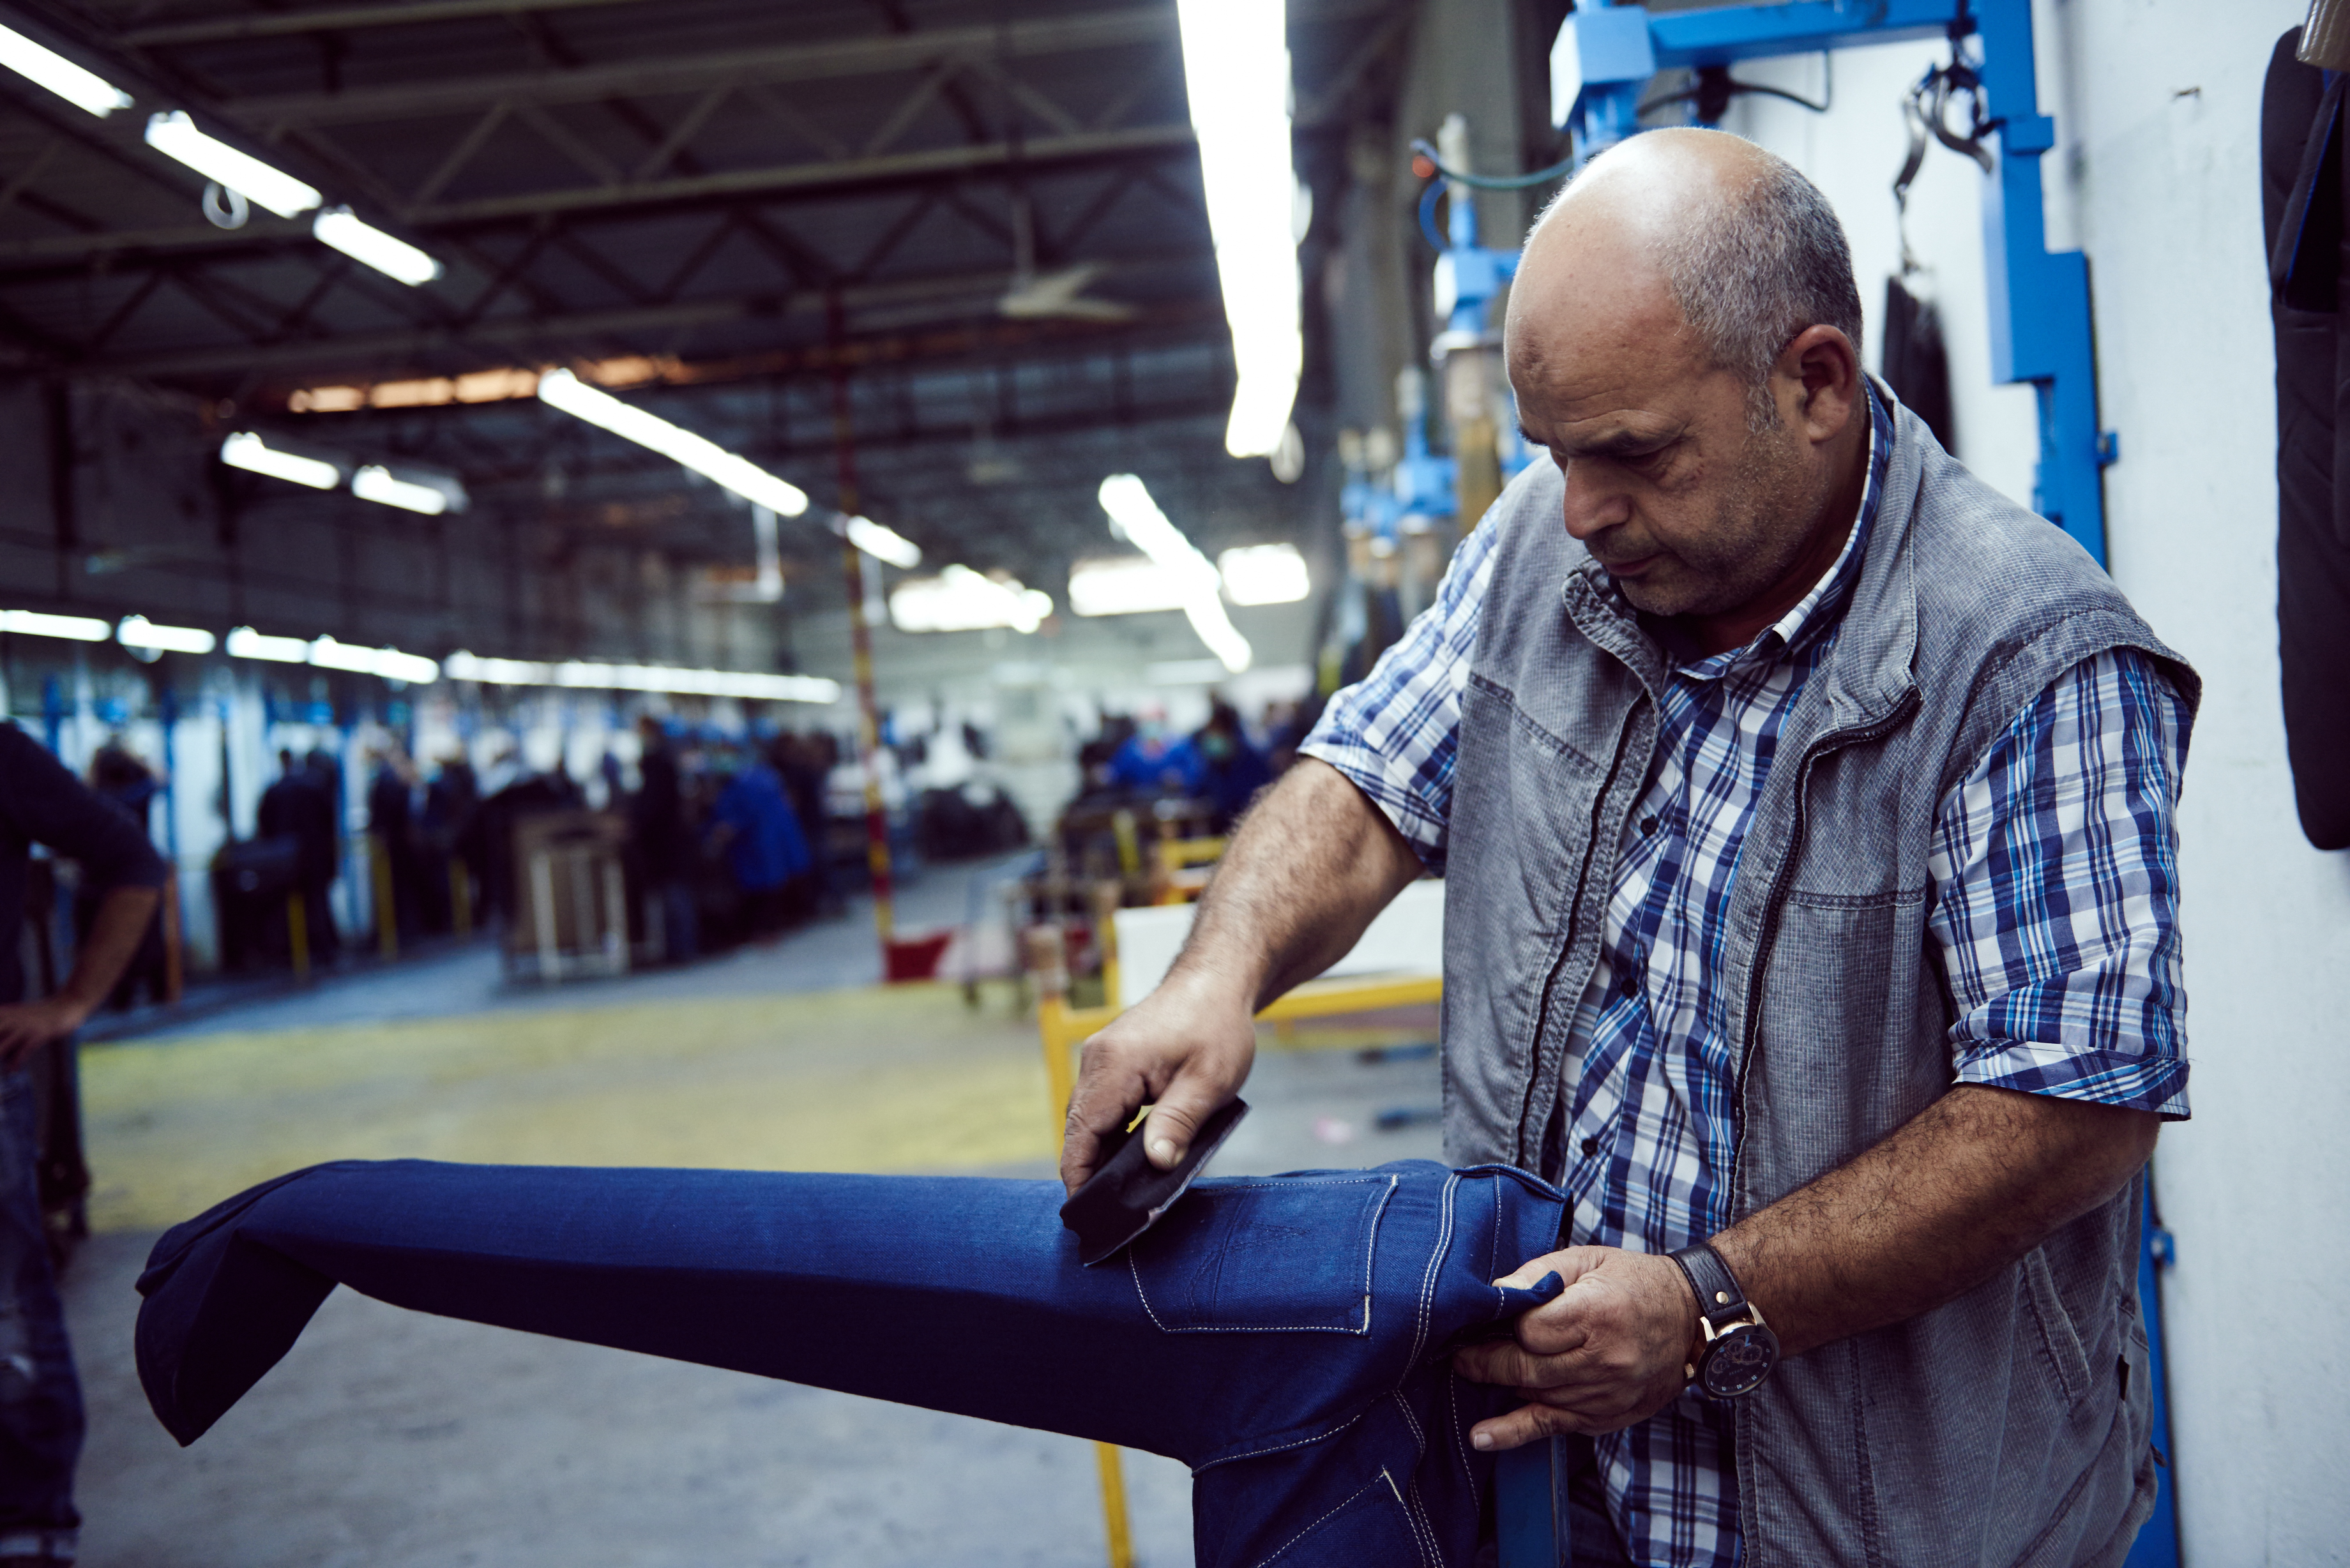 At Fashion Company Sahel in Tunisia, the denim fabric from the weaving factories is cut and sewn into jeans. The factory has been audited on behalf of Fair Wear Foundation (FWF) since ­December 2013.